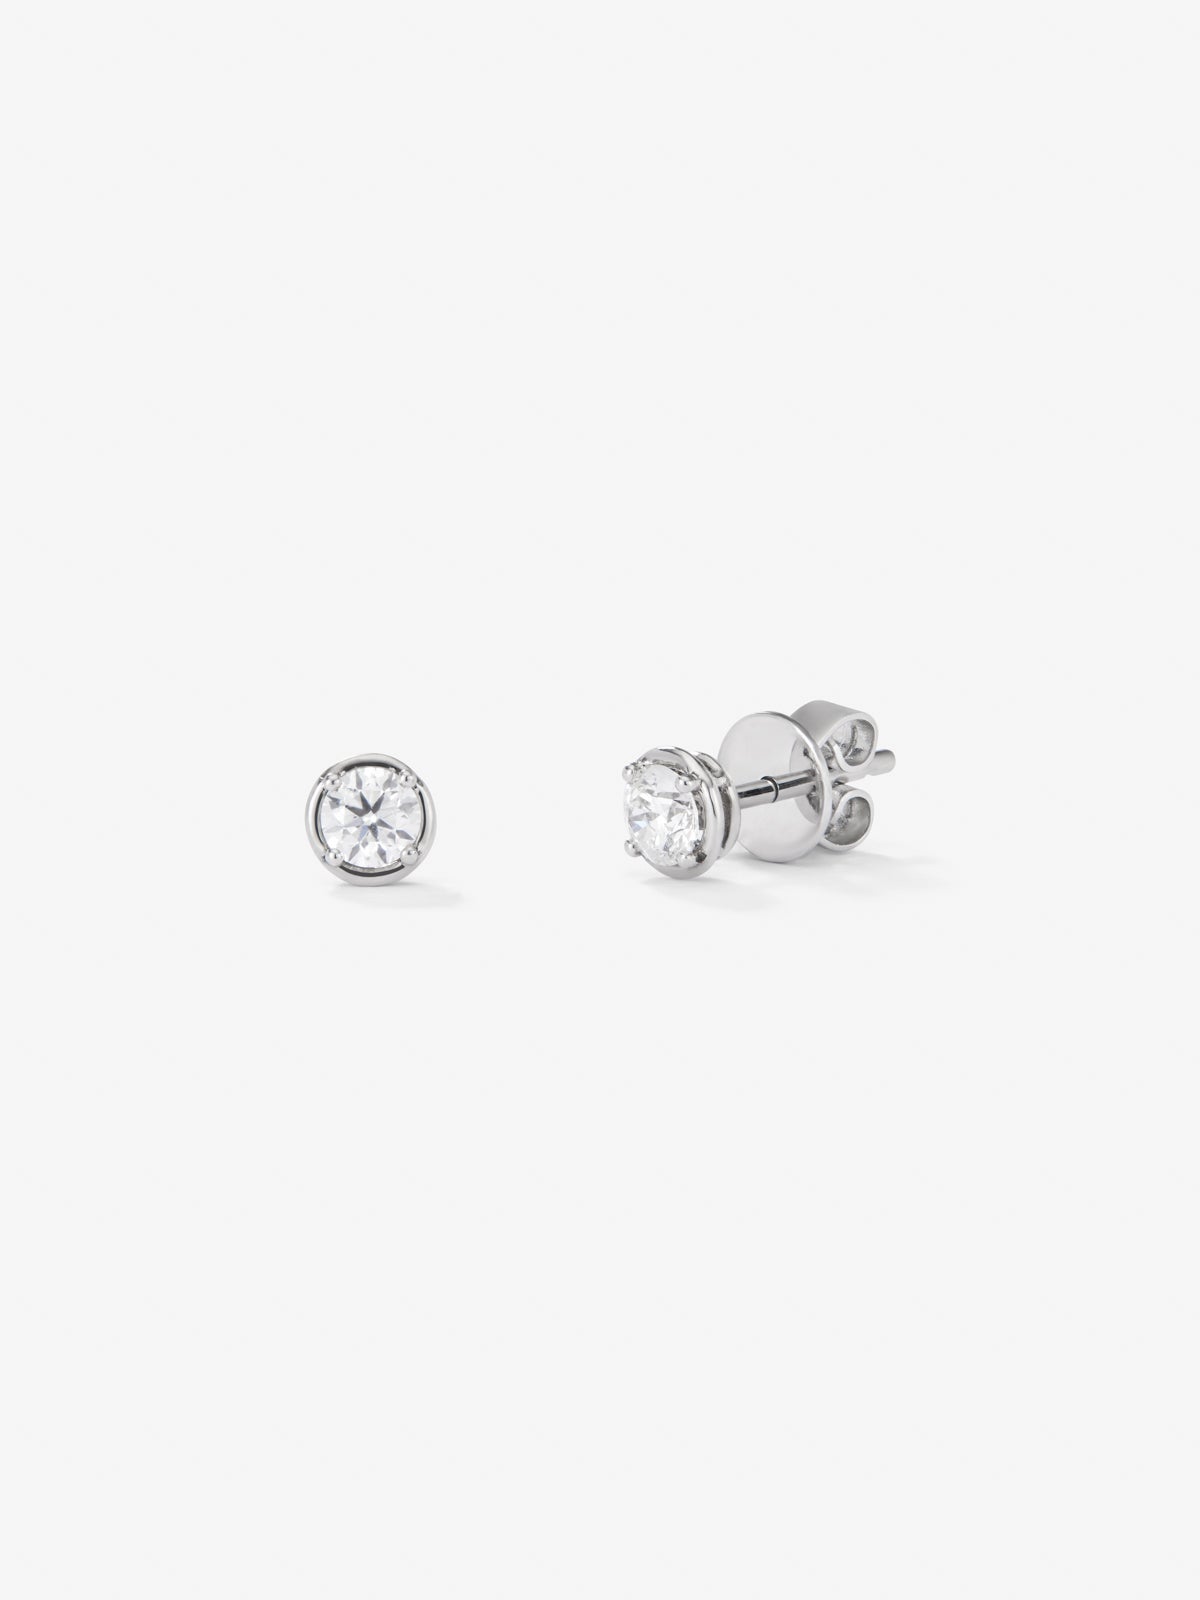 18K white gold earrings with solitary diamond